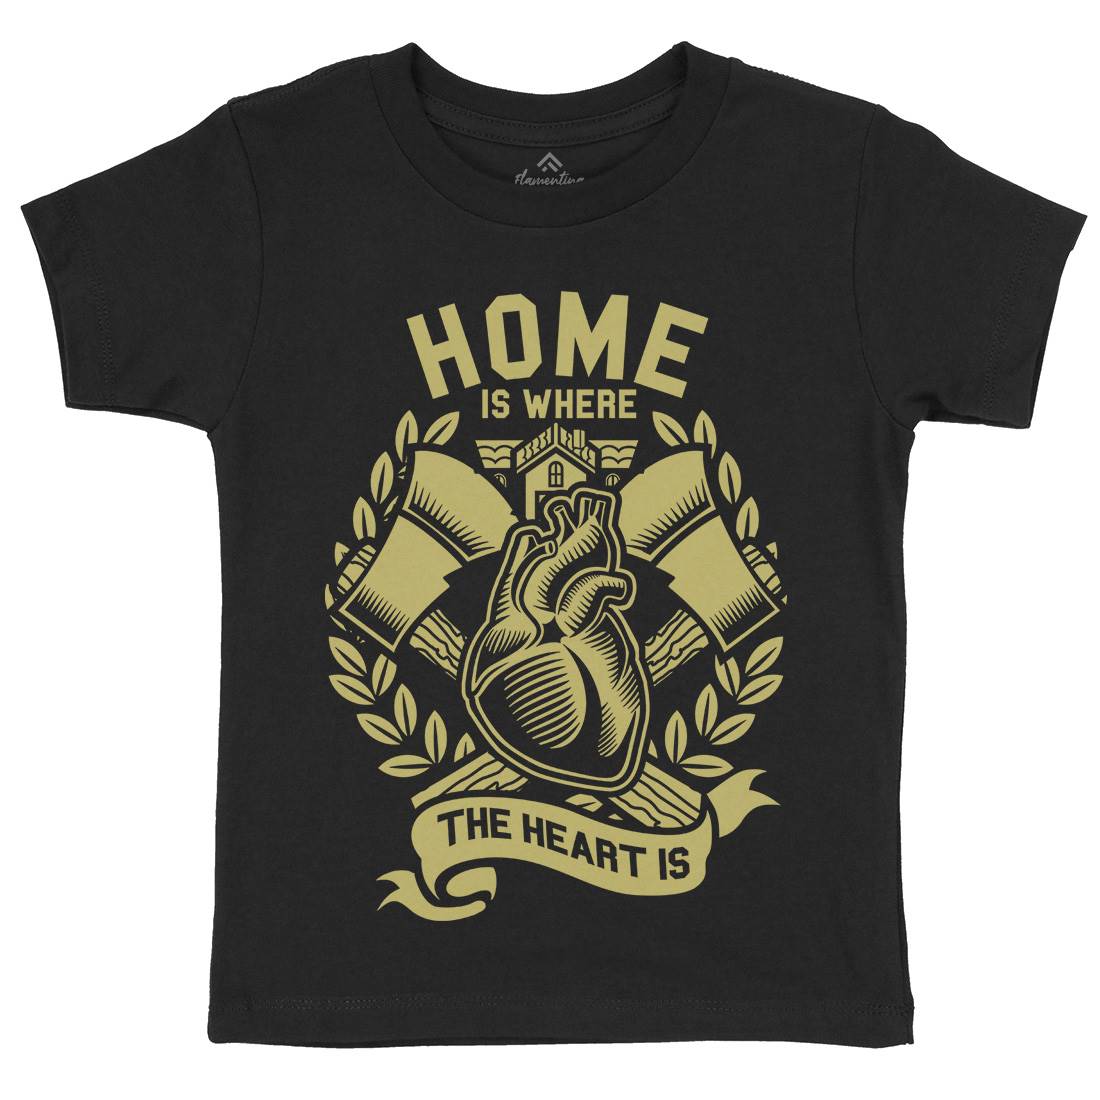 Home Kids Crew Neck T-Shirt Quotes A241